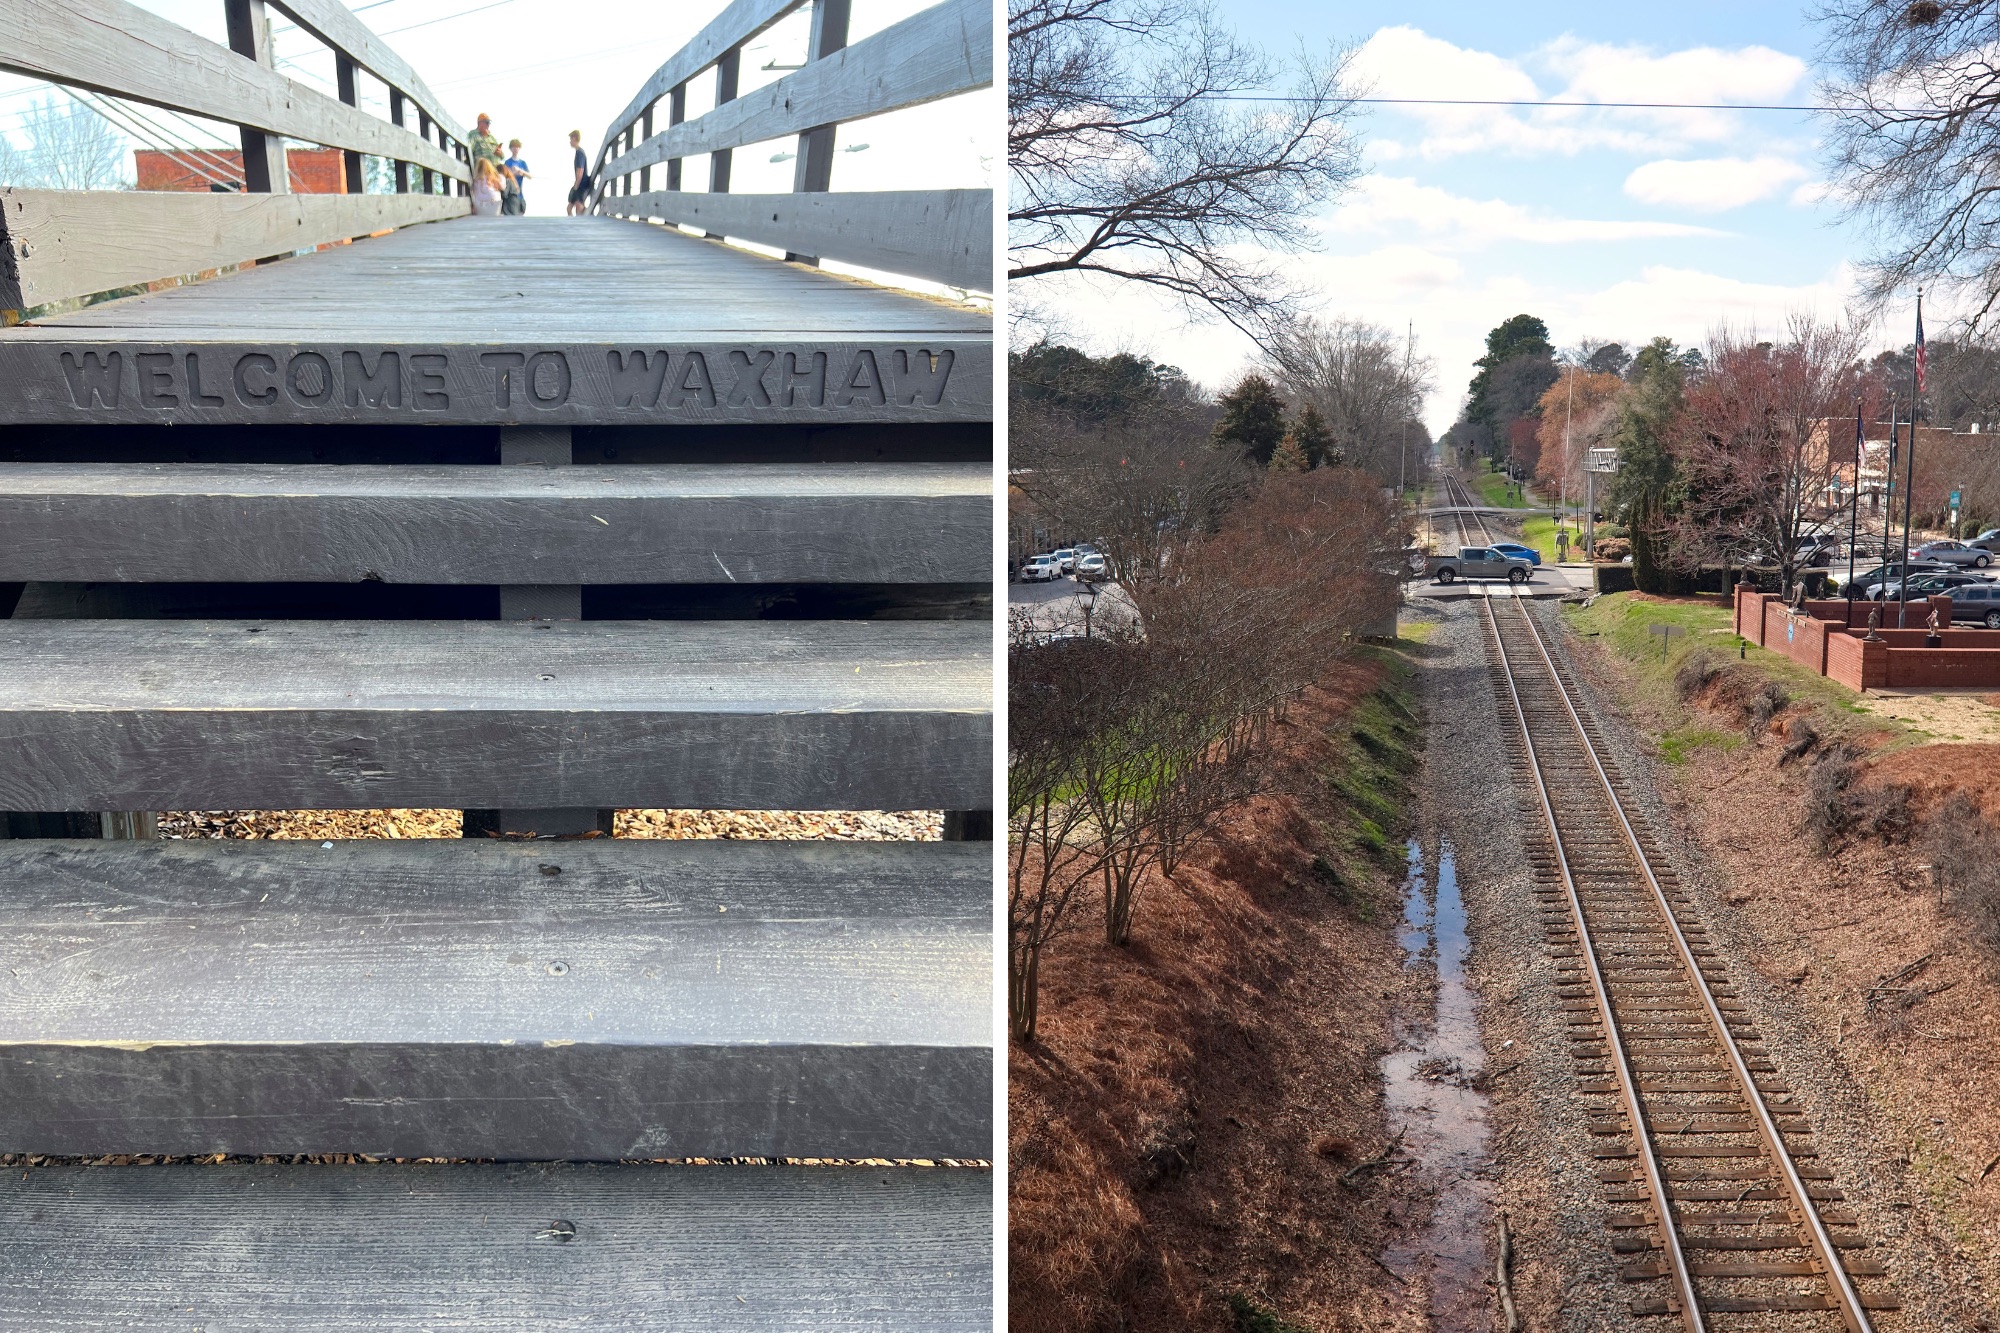 Two images: a close up of the steps of the Waxhaw Overhead Bridge which reads "Welcome to Waxhaw" and the view of the train tracks from the top of the bridge